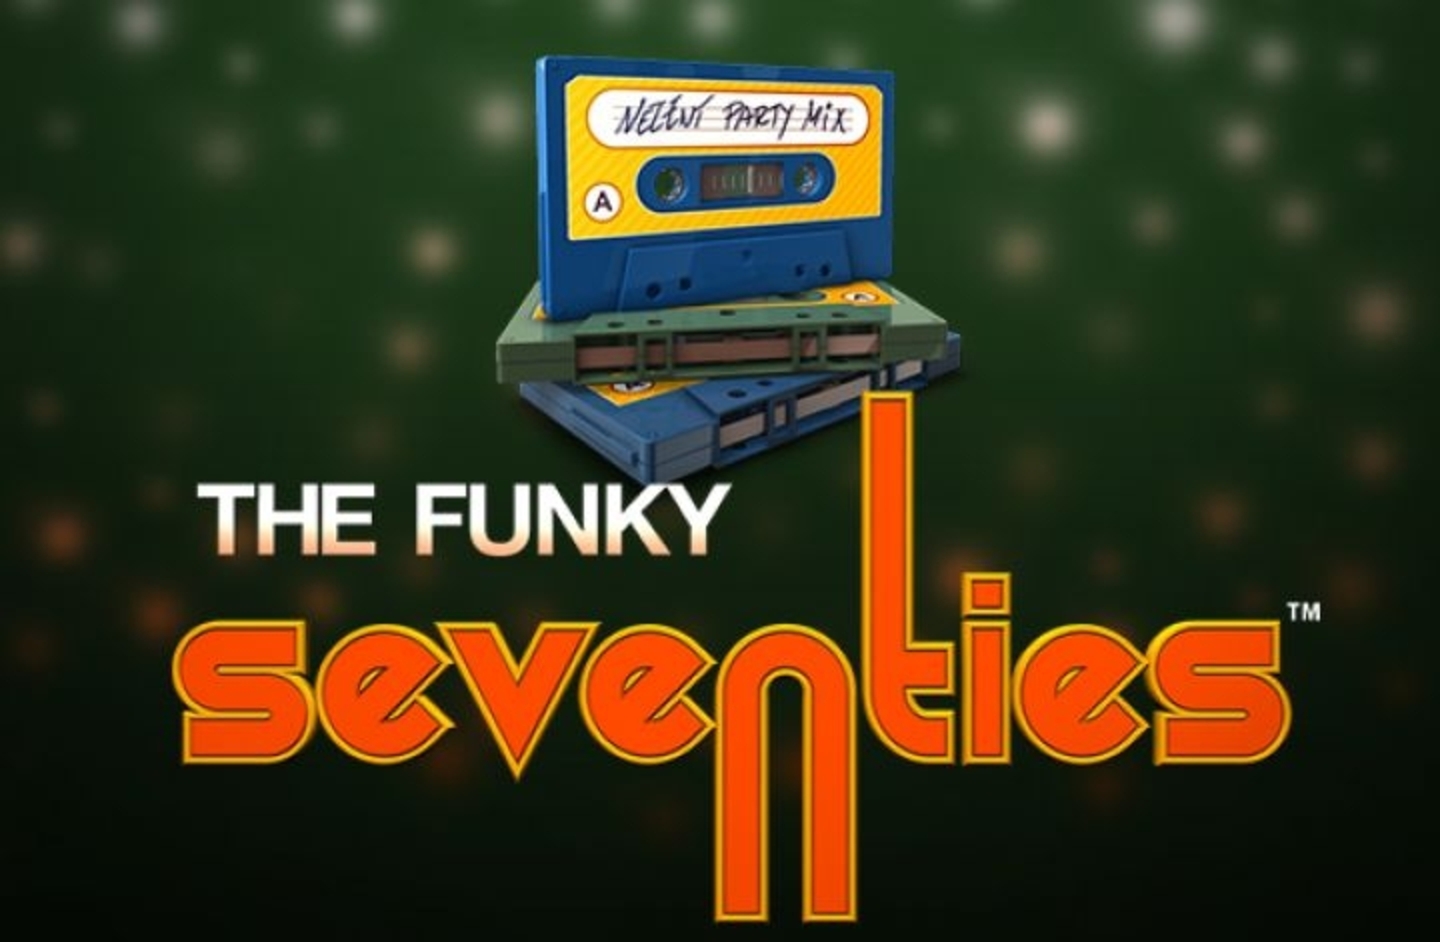 The Funky Seventies demo